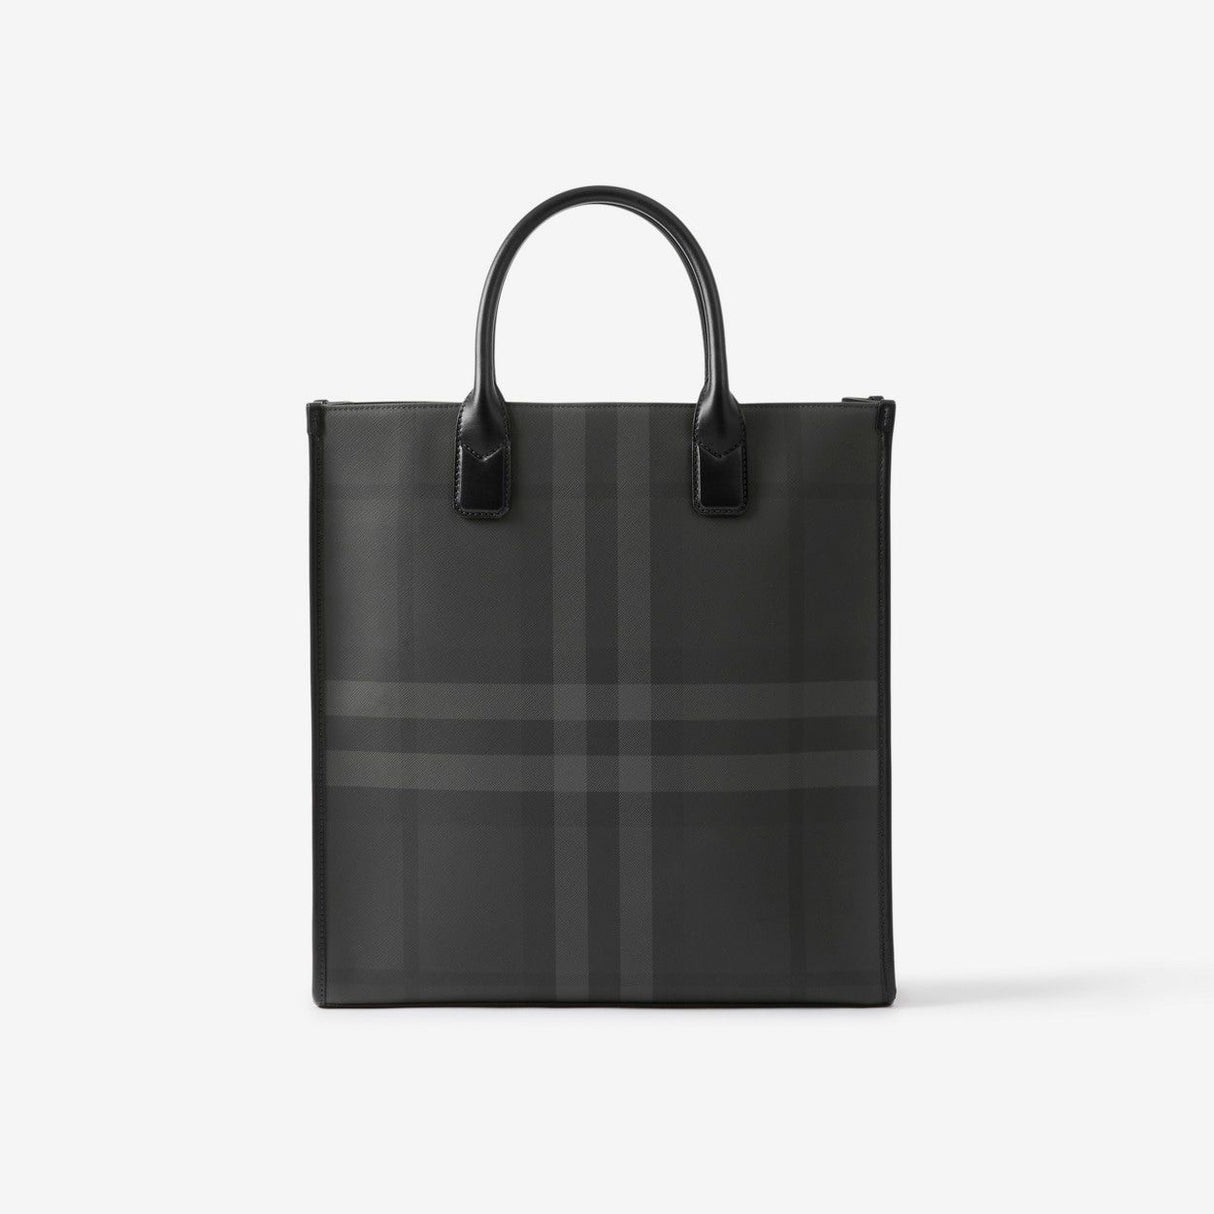 BURBERRY Stylish Black Tote Bag for Men - SS24 Collection